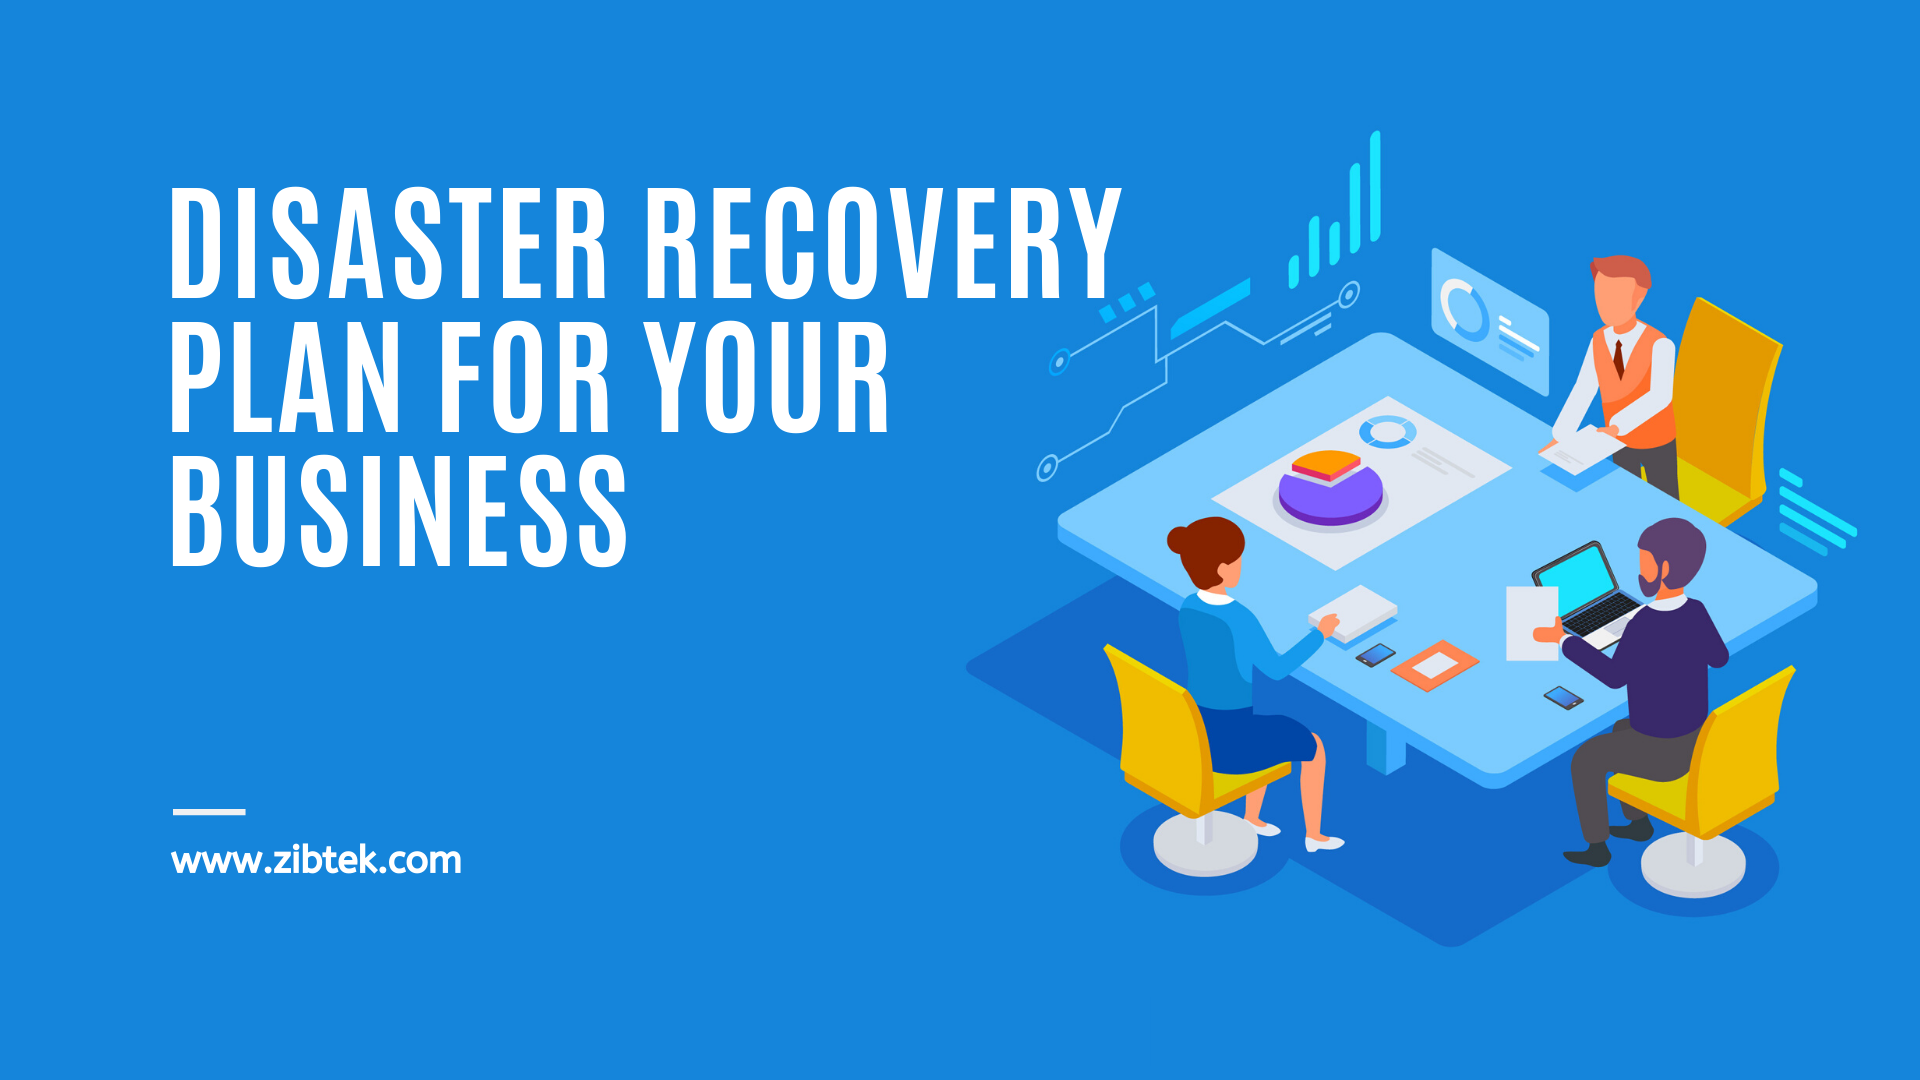 How to craft a disaster recovery plan for your business